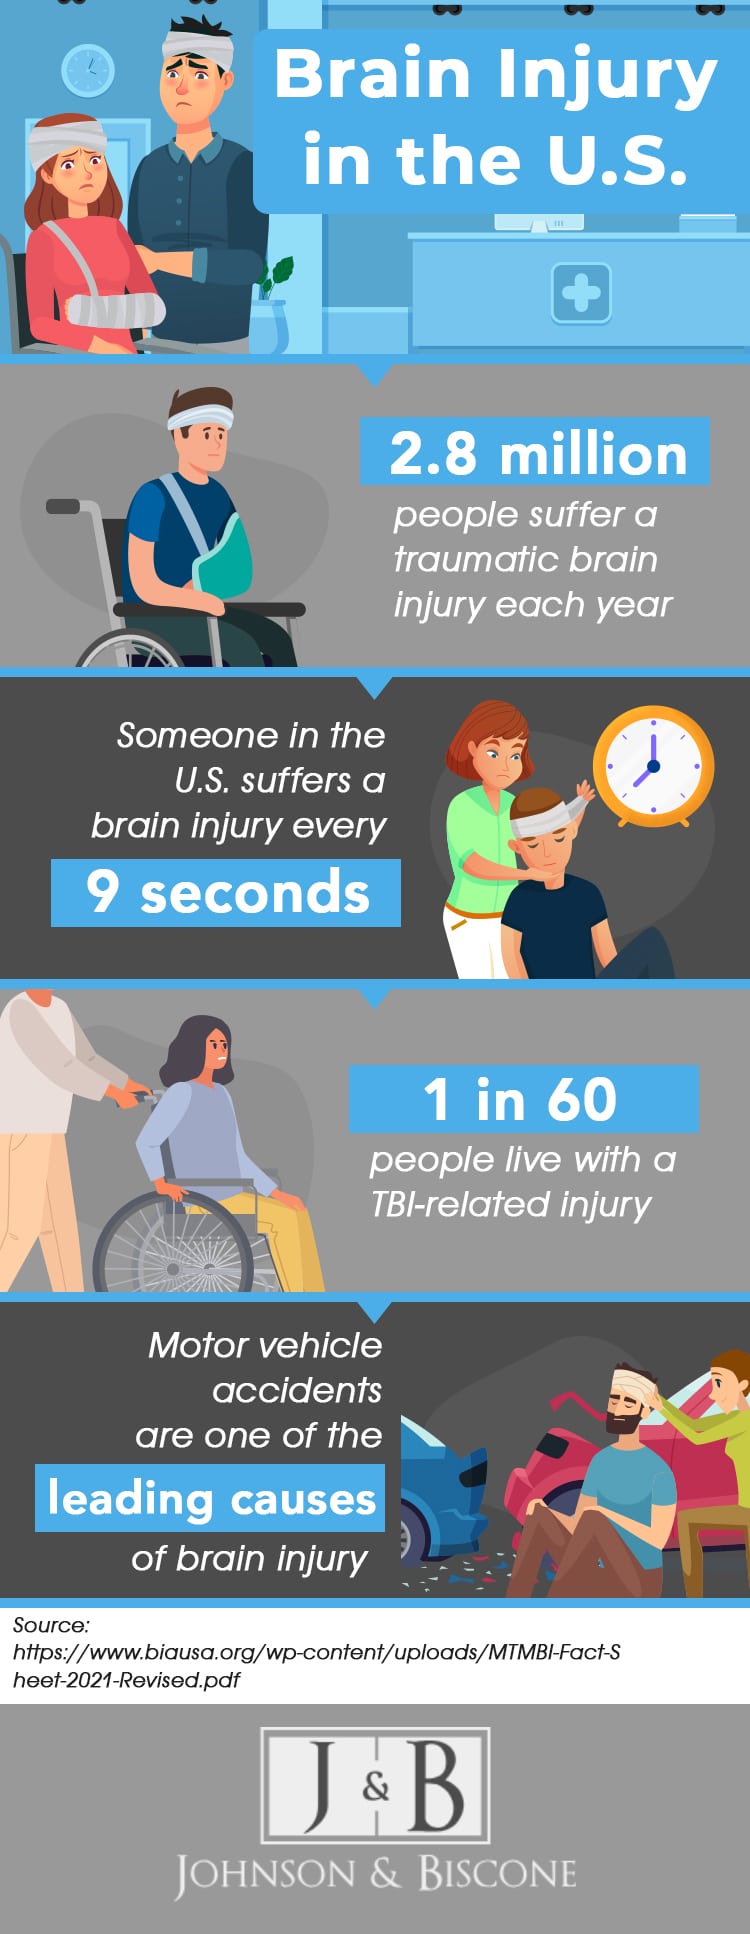 An infographic about brain injury statistics in the US.